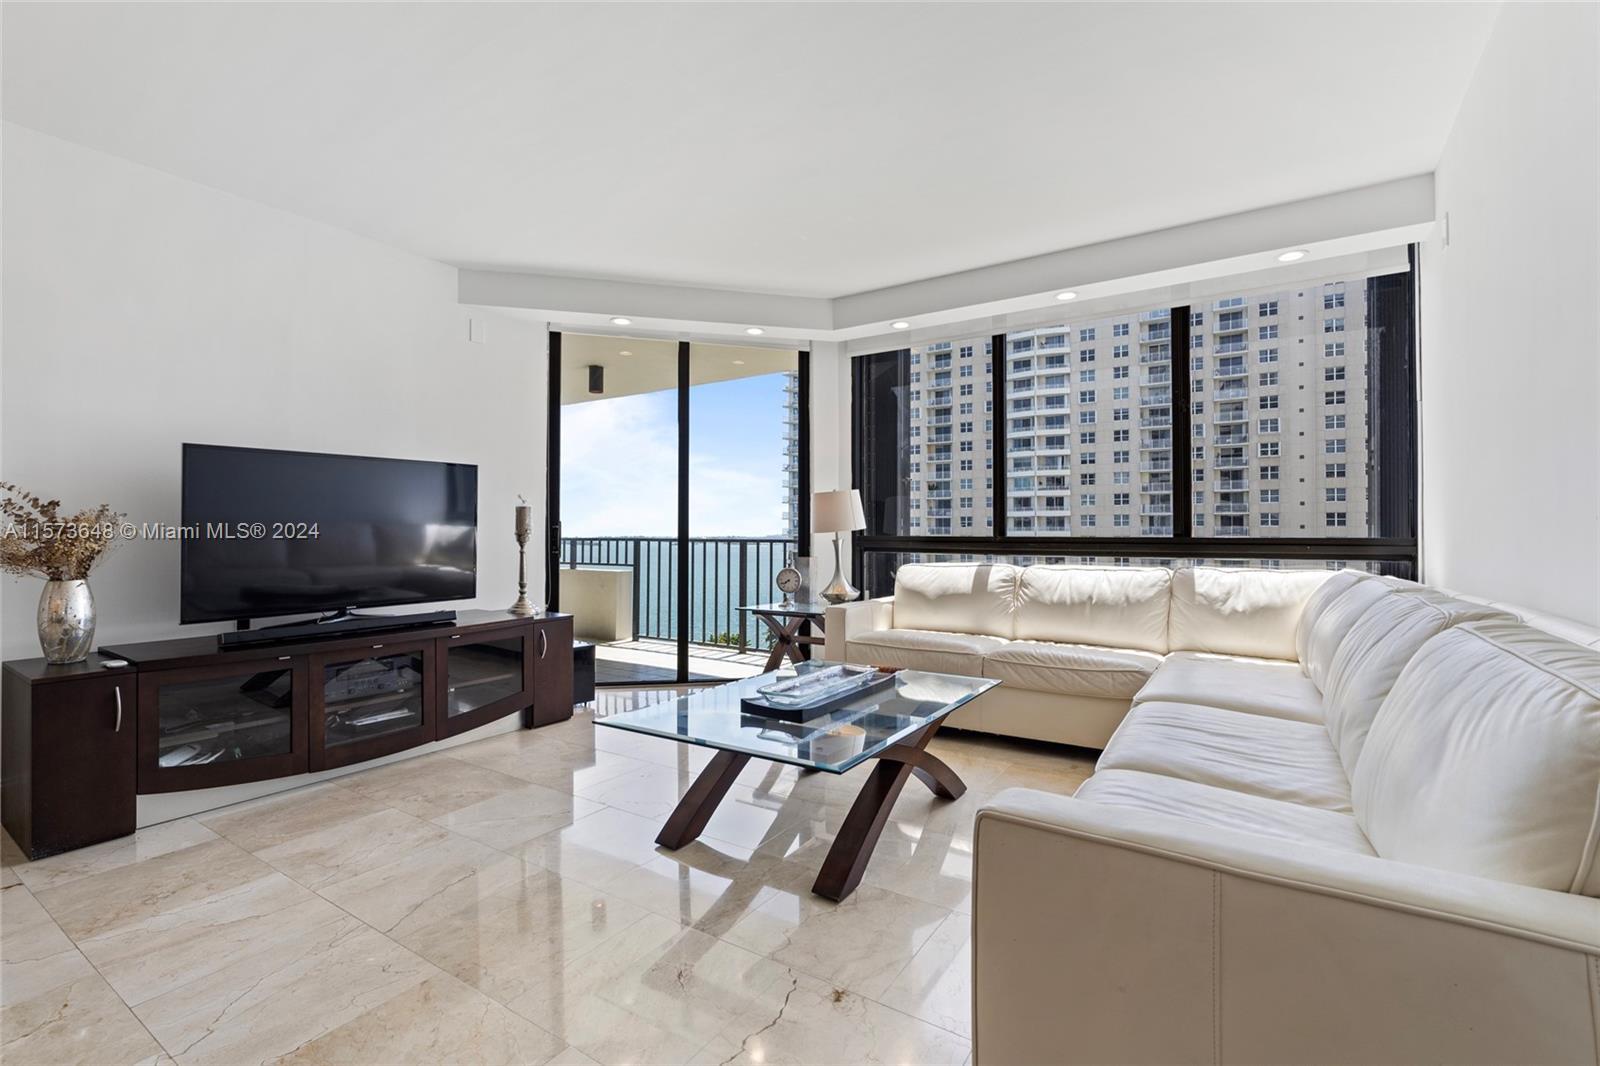 Beautiful 2/2 very bright and spacious in exclusive Brickell Key with gorgeous Bay views and Skyline